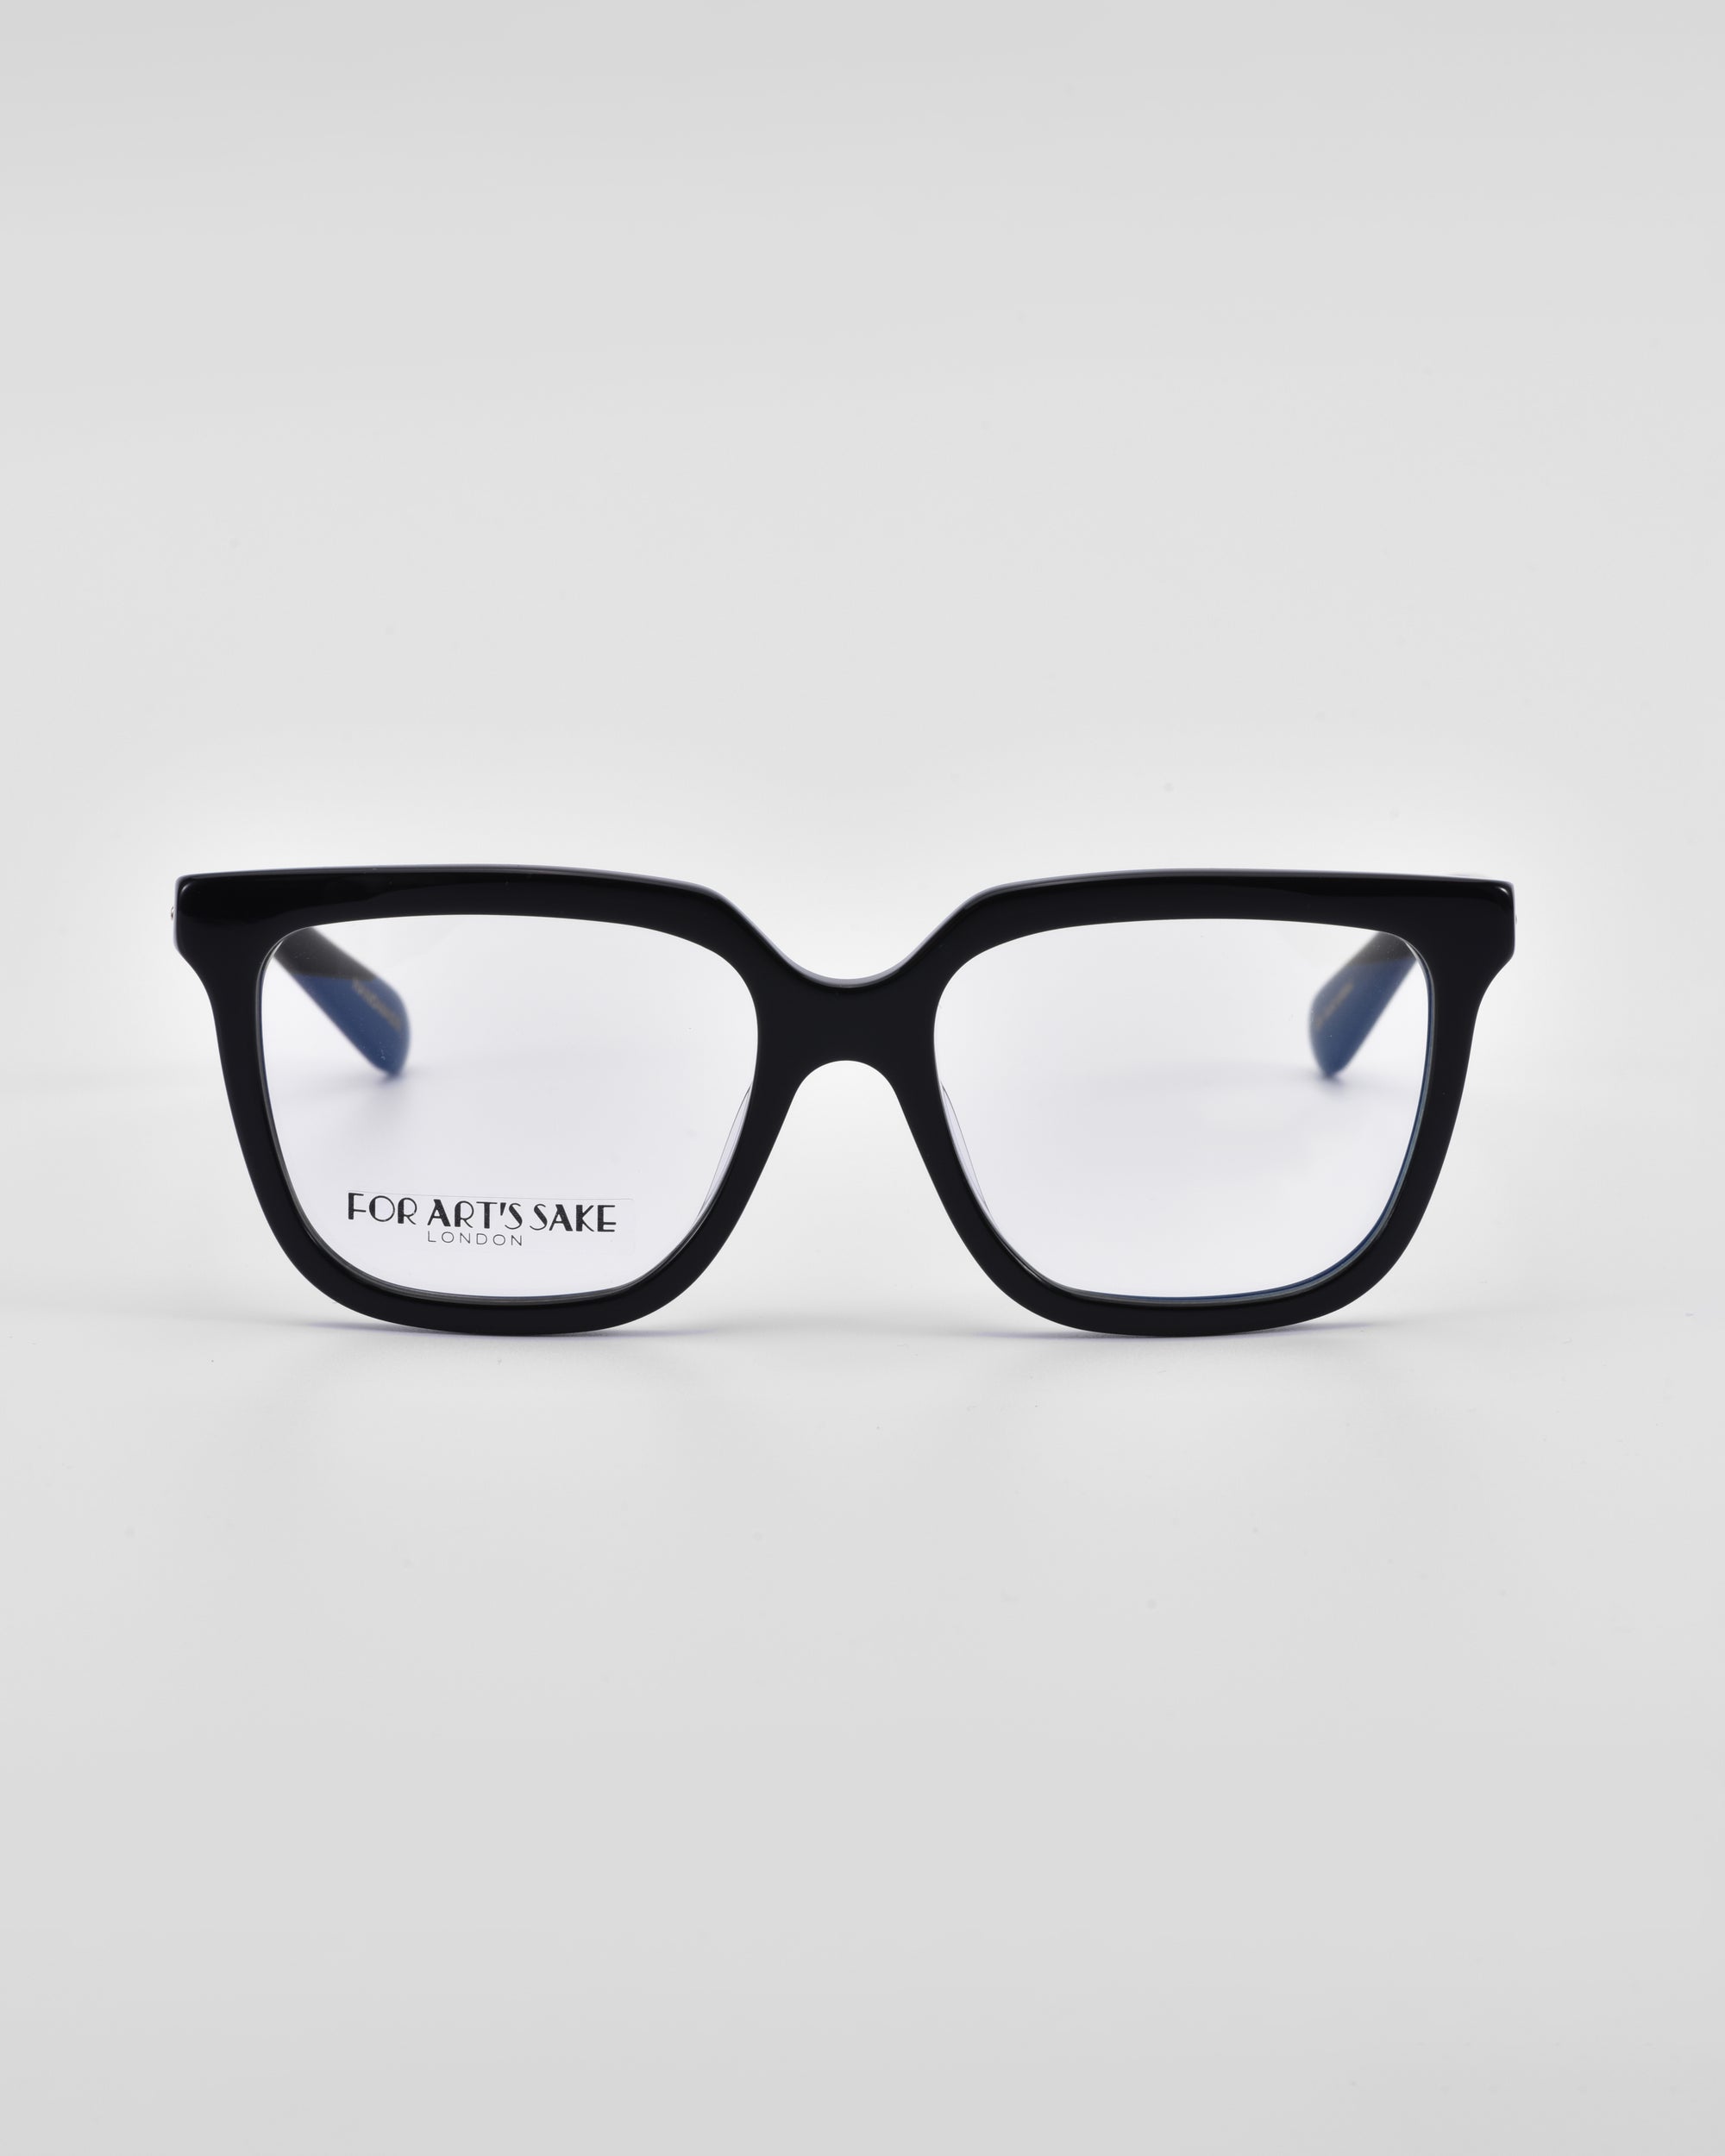 A pair of black-framed eyeglasses with a slightly rectangular, classic square silhouette. The lenses are clear, and the left lens has the text &quot;Nina&quot; and &quot;For Art&#39;s Sake®&quot; printed in black in the lower corner. The background is plain white.